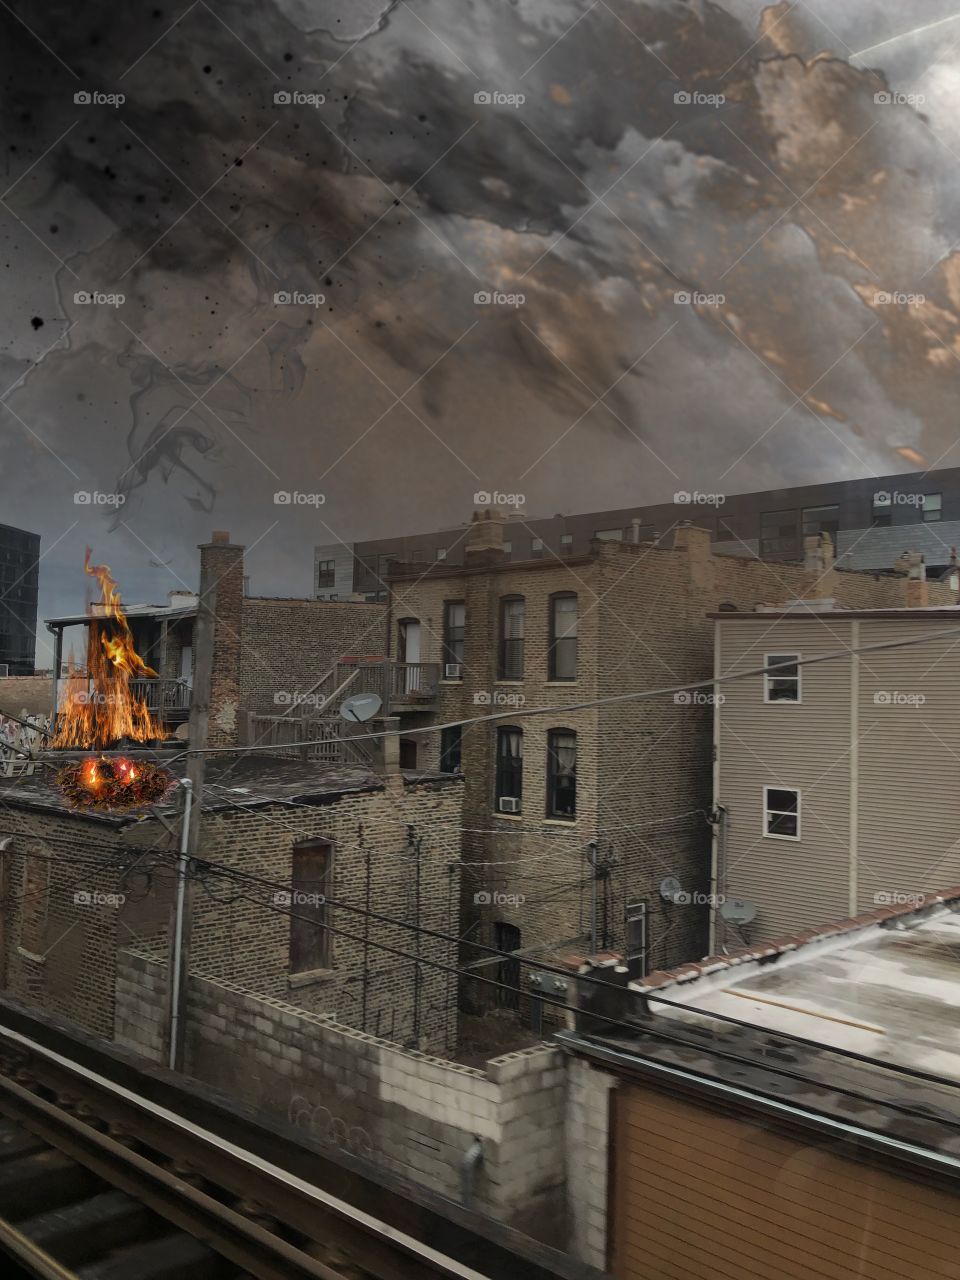 Chicago city, I took this picture while I was in the train. Neighbor in fire 